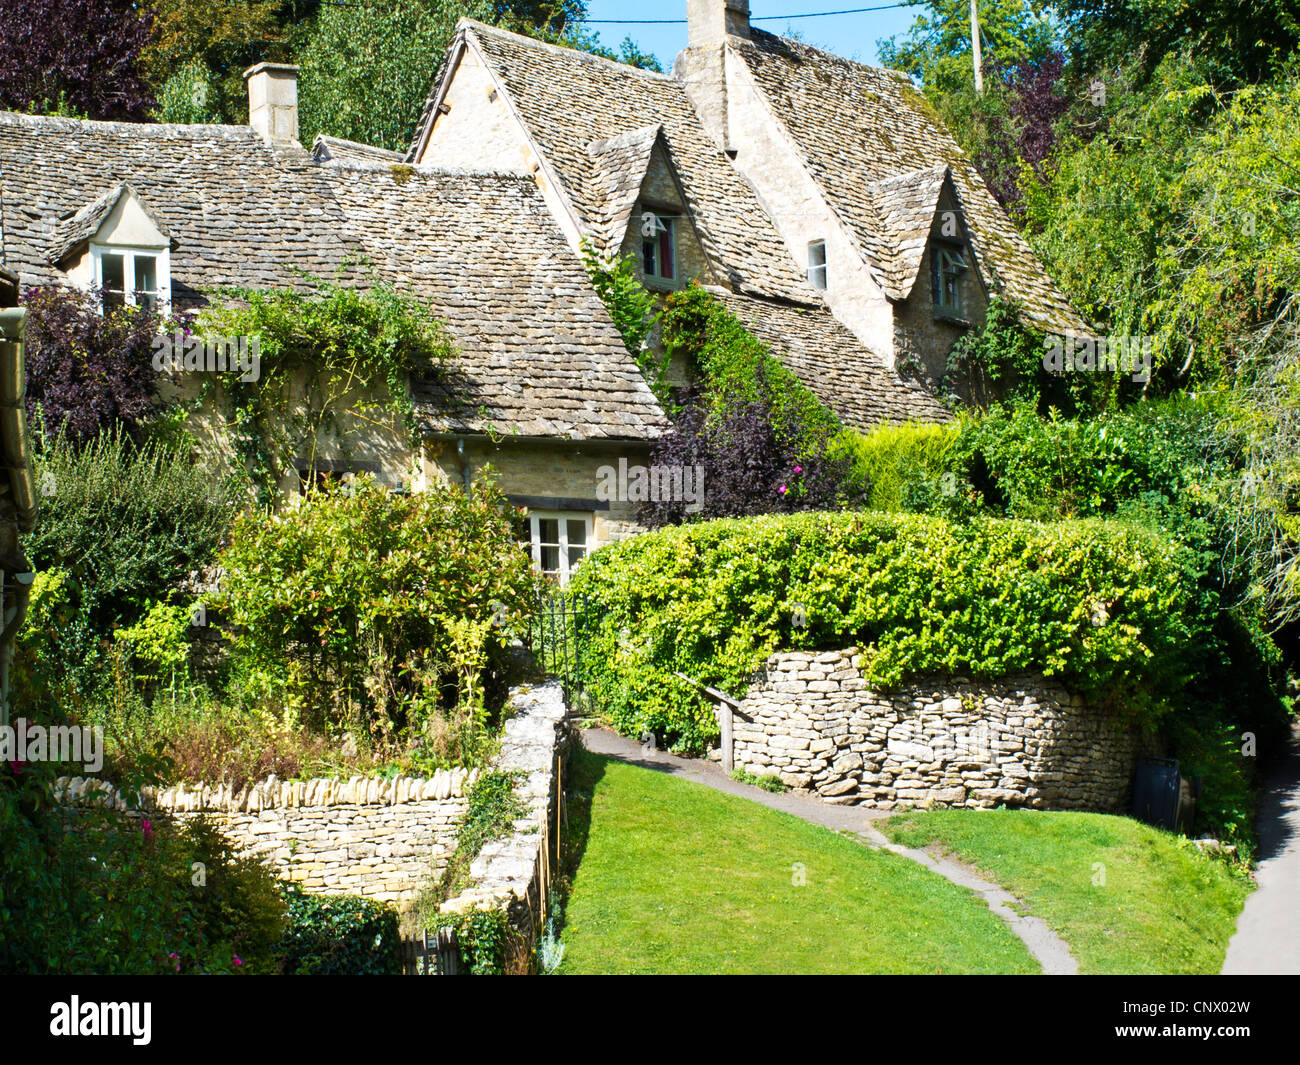 The picturesque cottages in Arlington Row in the pretty English Cotswold village of Bibury in Gloucestershire, England, UK. Stock Photo